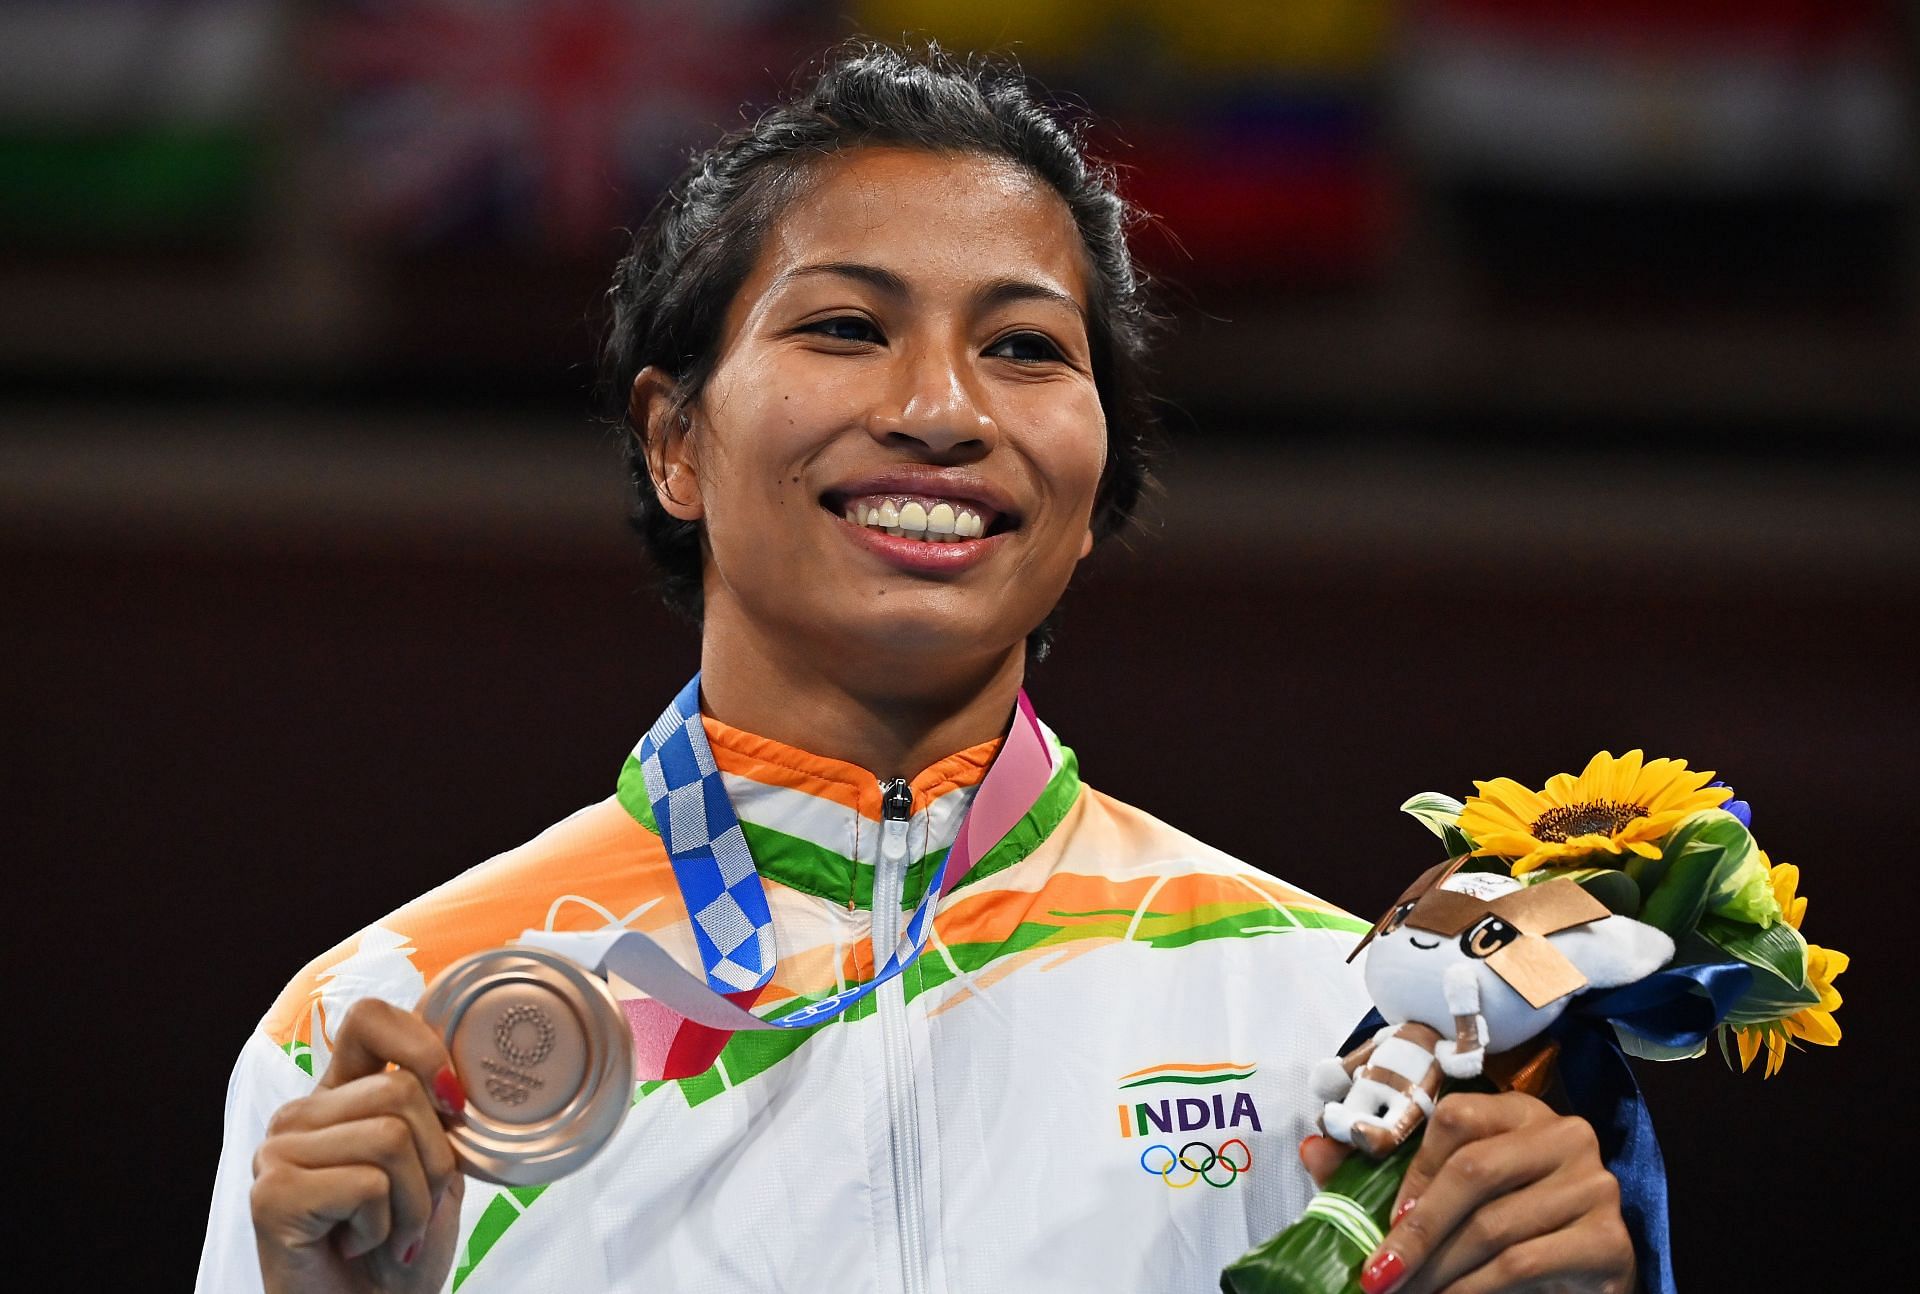 Lovlina Borgohain with her Tokyo Olympic bronze medal. (Image courtesy: Getty)